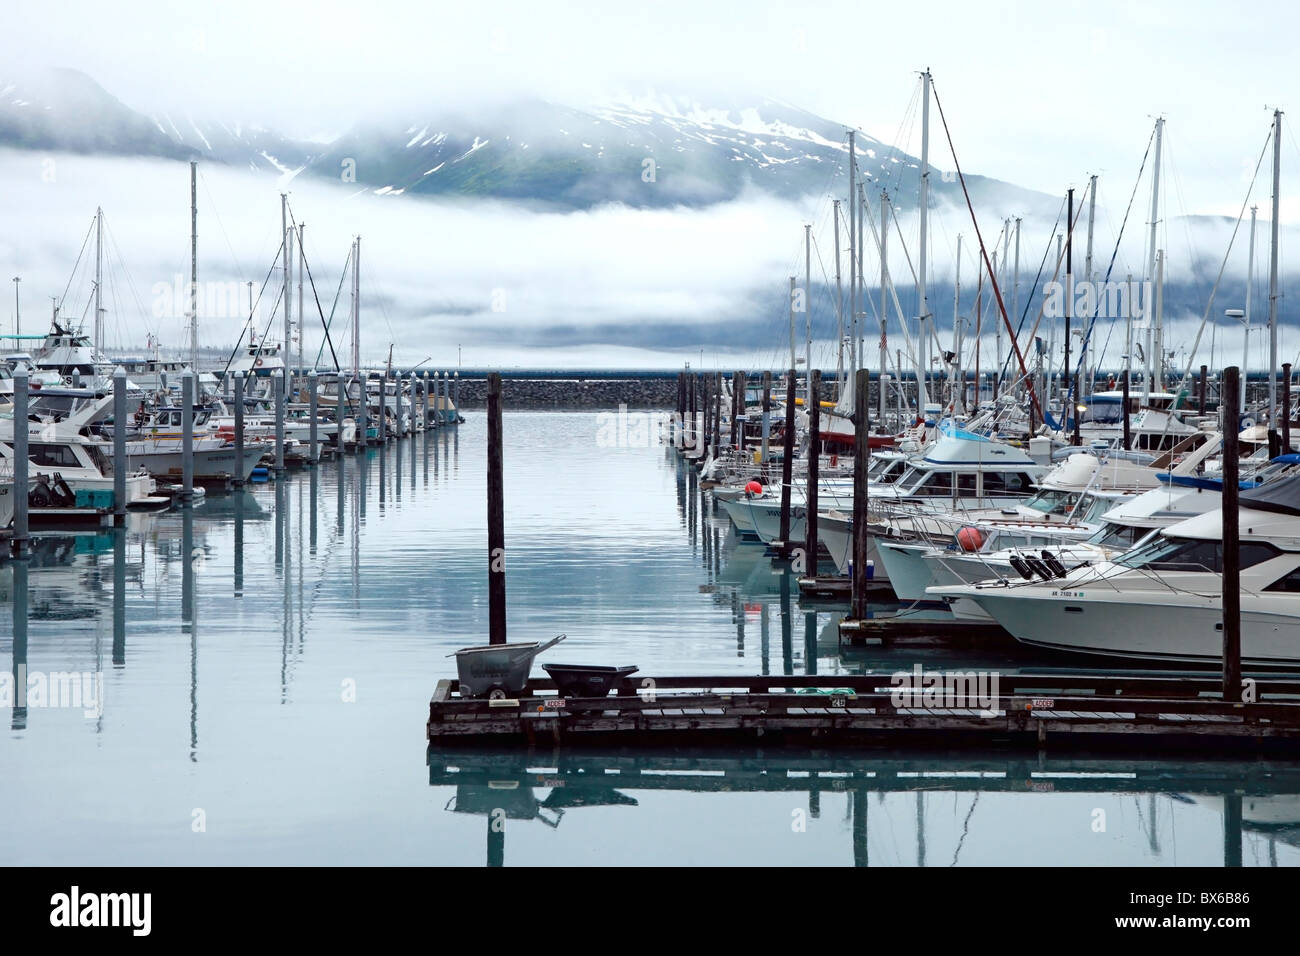 Boats on the ocean at a marina in bay with snowy mountains and low clouds in the distance at Valdez, Alaska, USA. Stock Photo